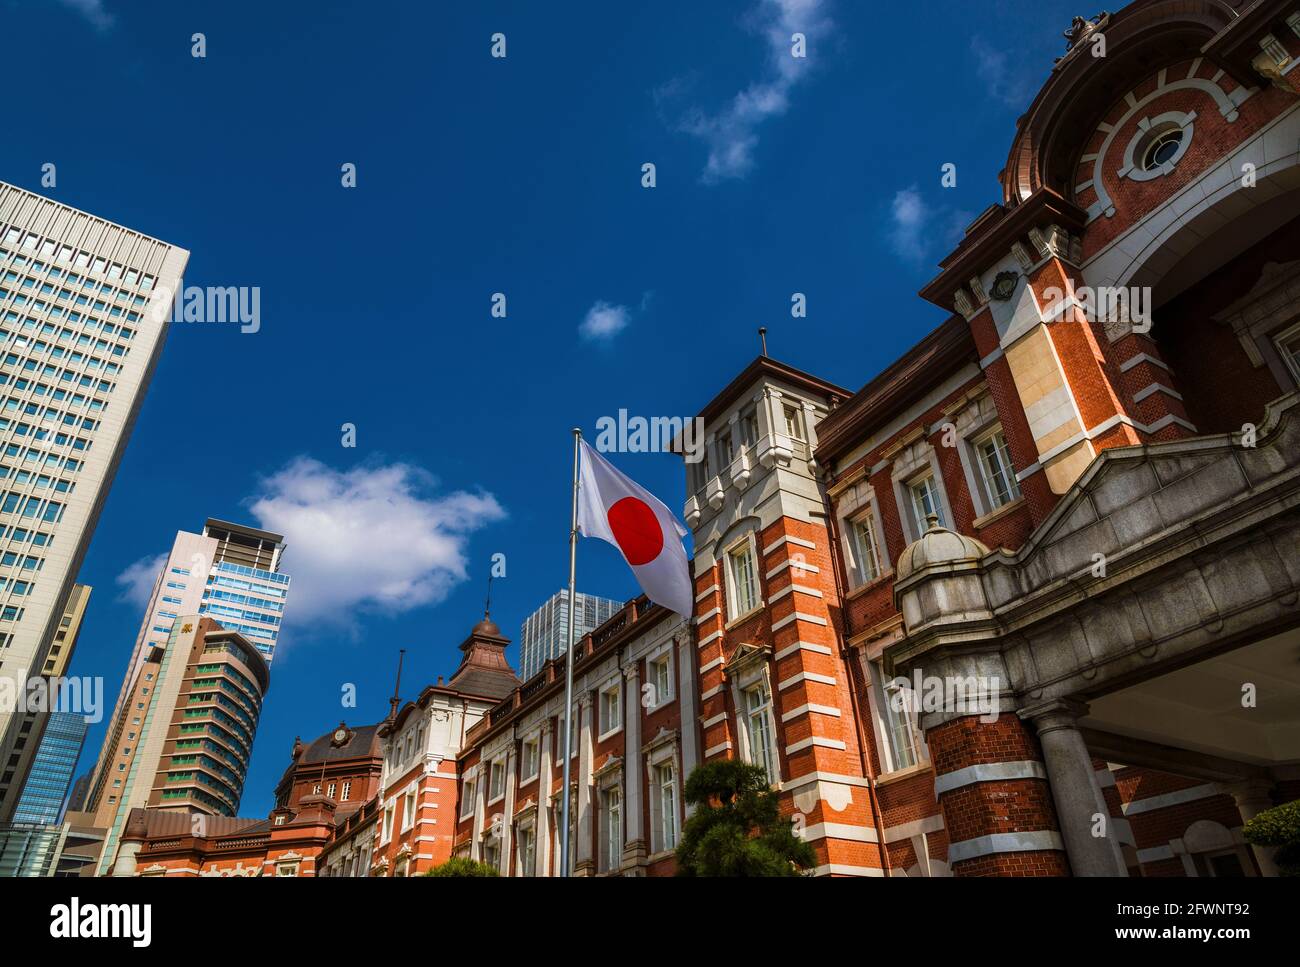 Tokyo Station beautiful red brick facade with Japanese national flag Stock Photo